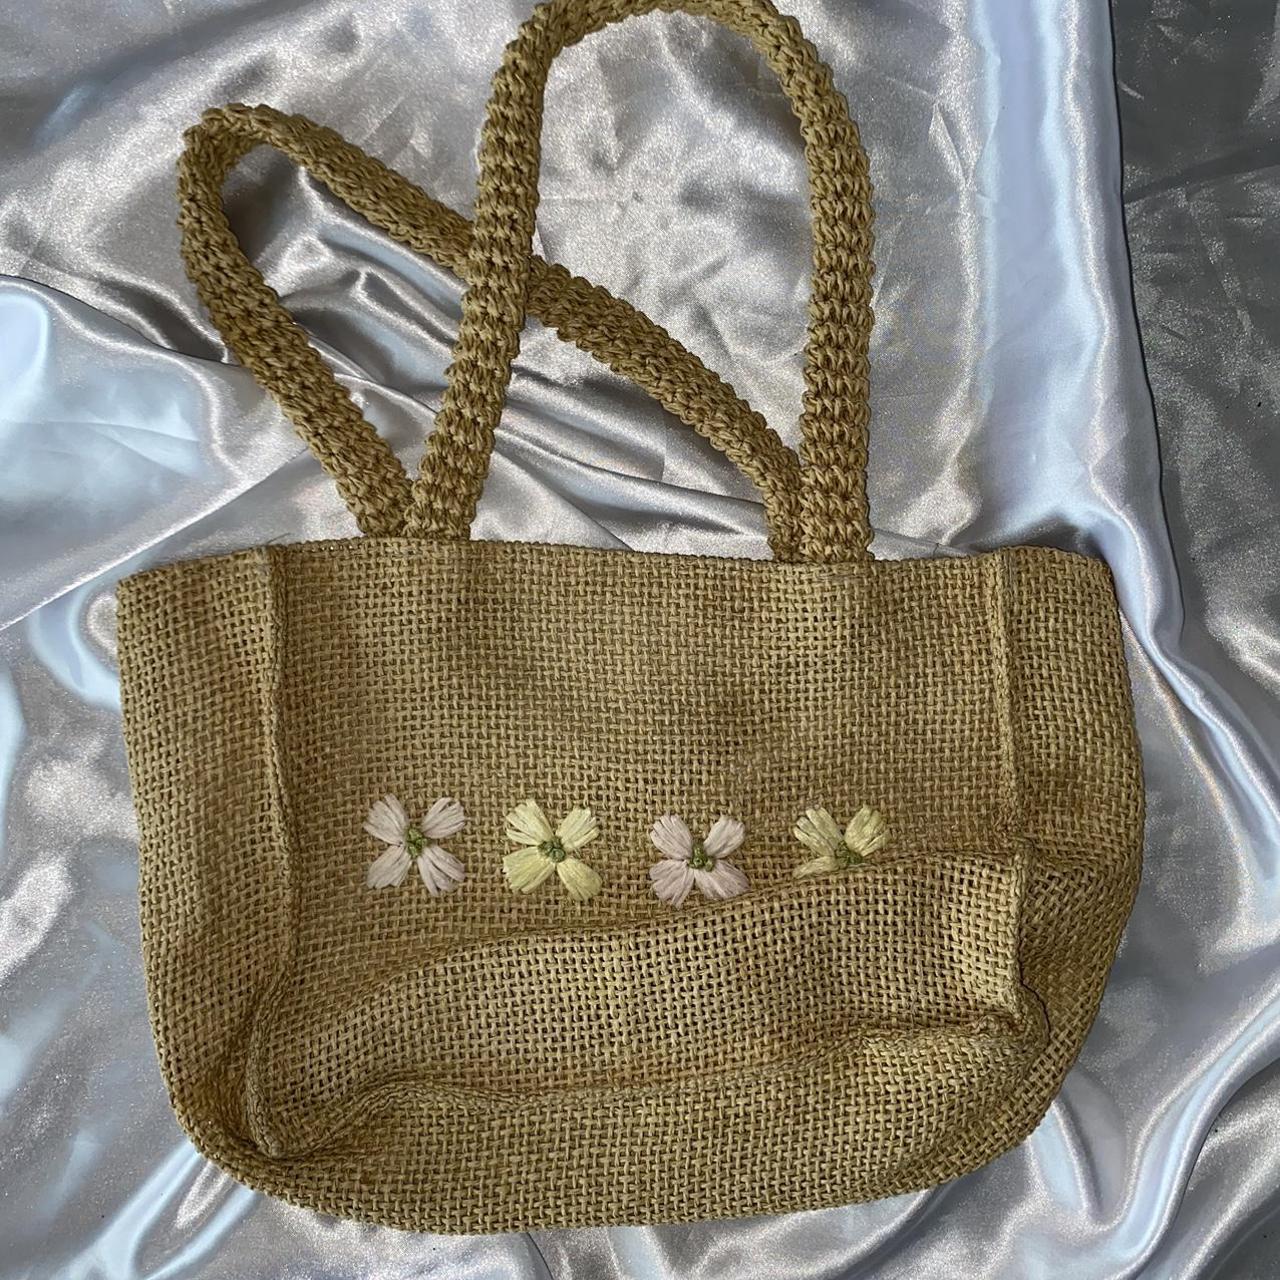 amazing shaped bag made of woven straw FREE - Depop